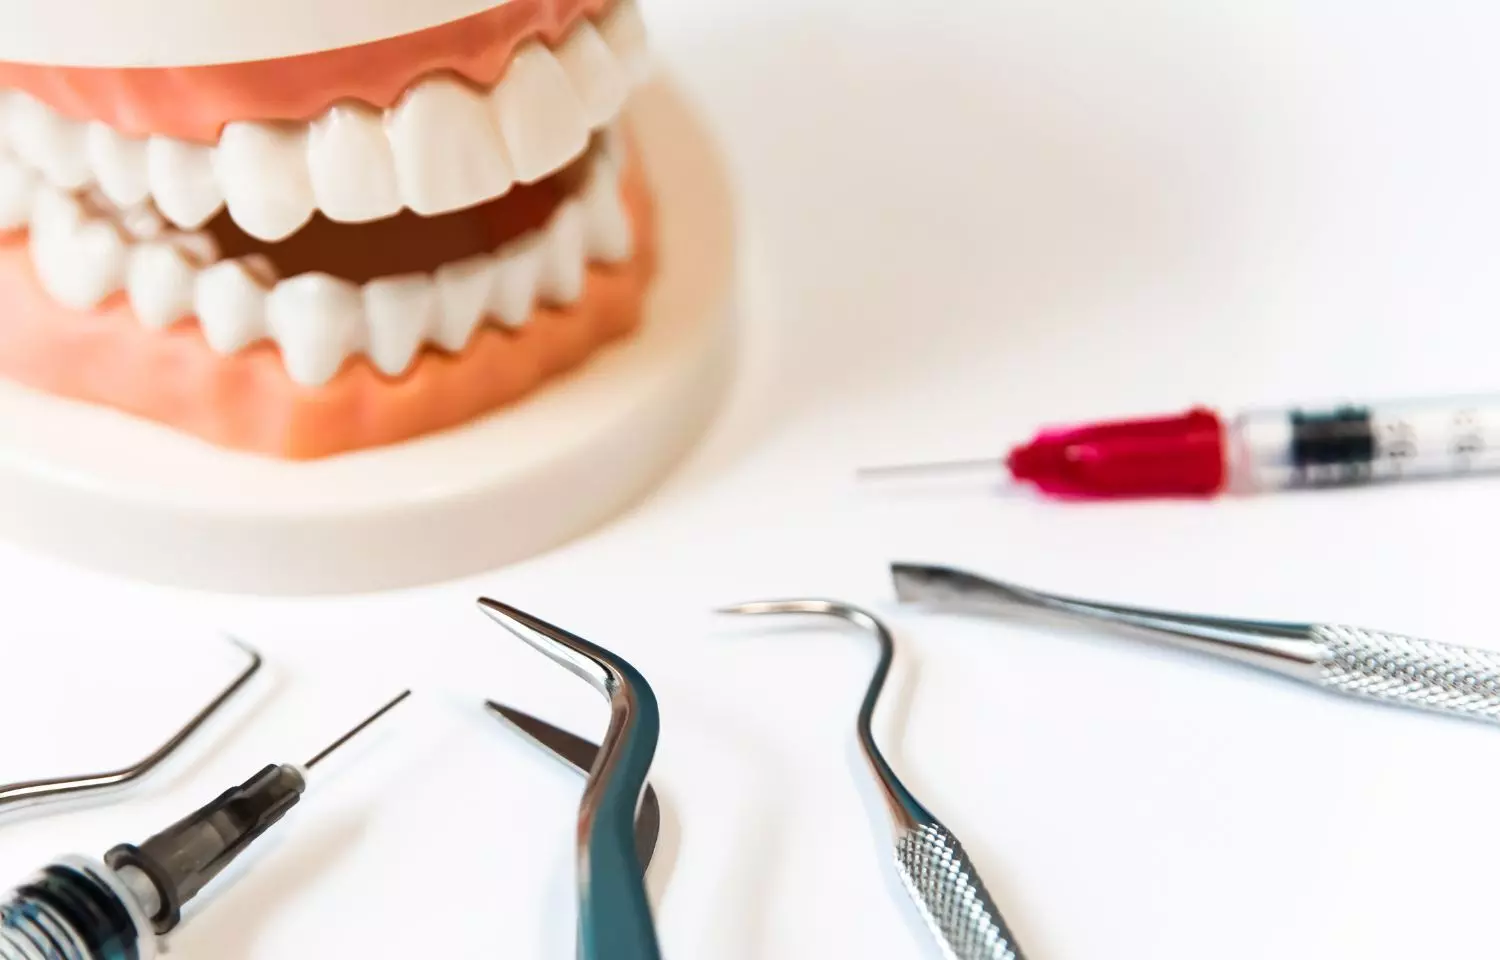 Periodontal maintenance care shortens hospitalization period among heart attack patients